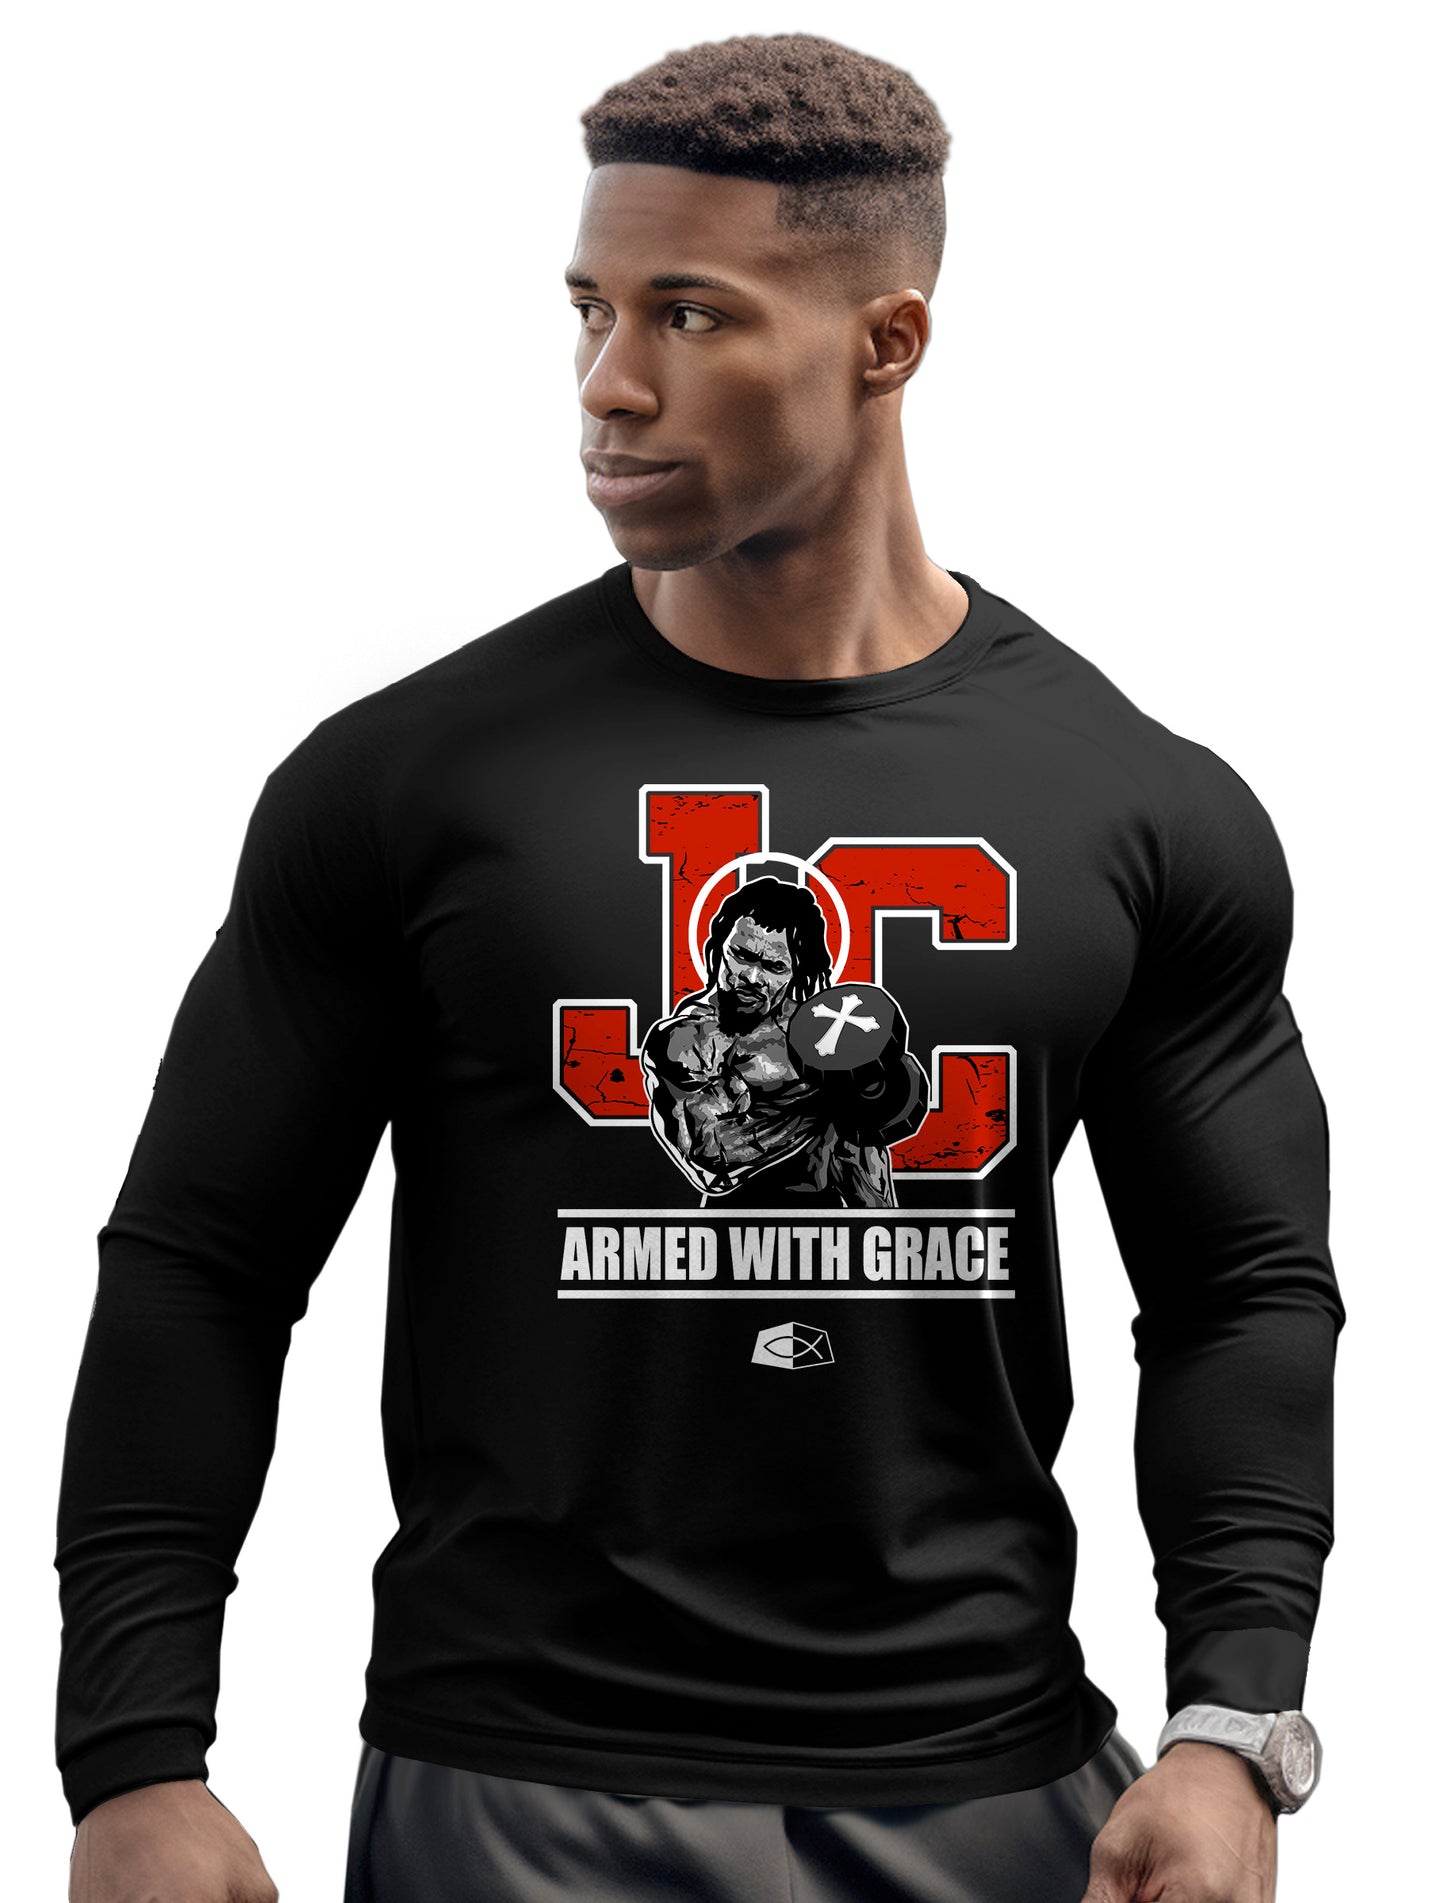 ARMED WITH GRACE - Men’s Long Sleeve Shirt